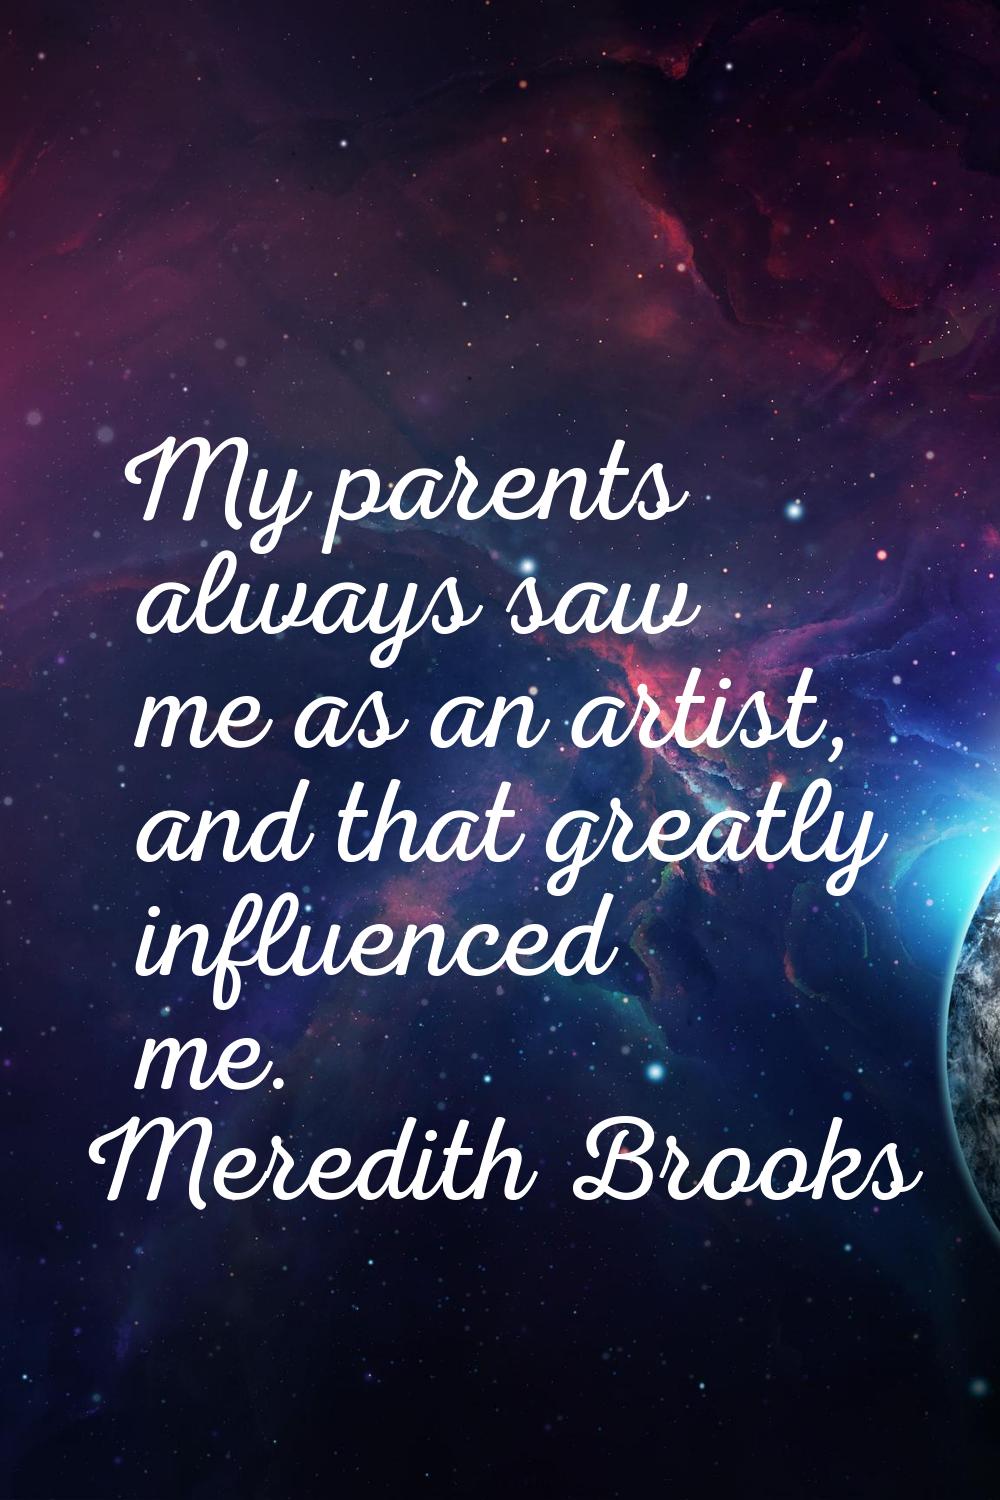 My parents always saw me as an artist, and that greatly influenced me.